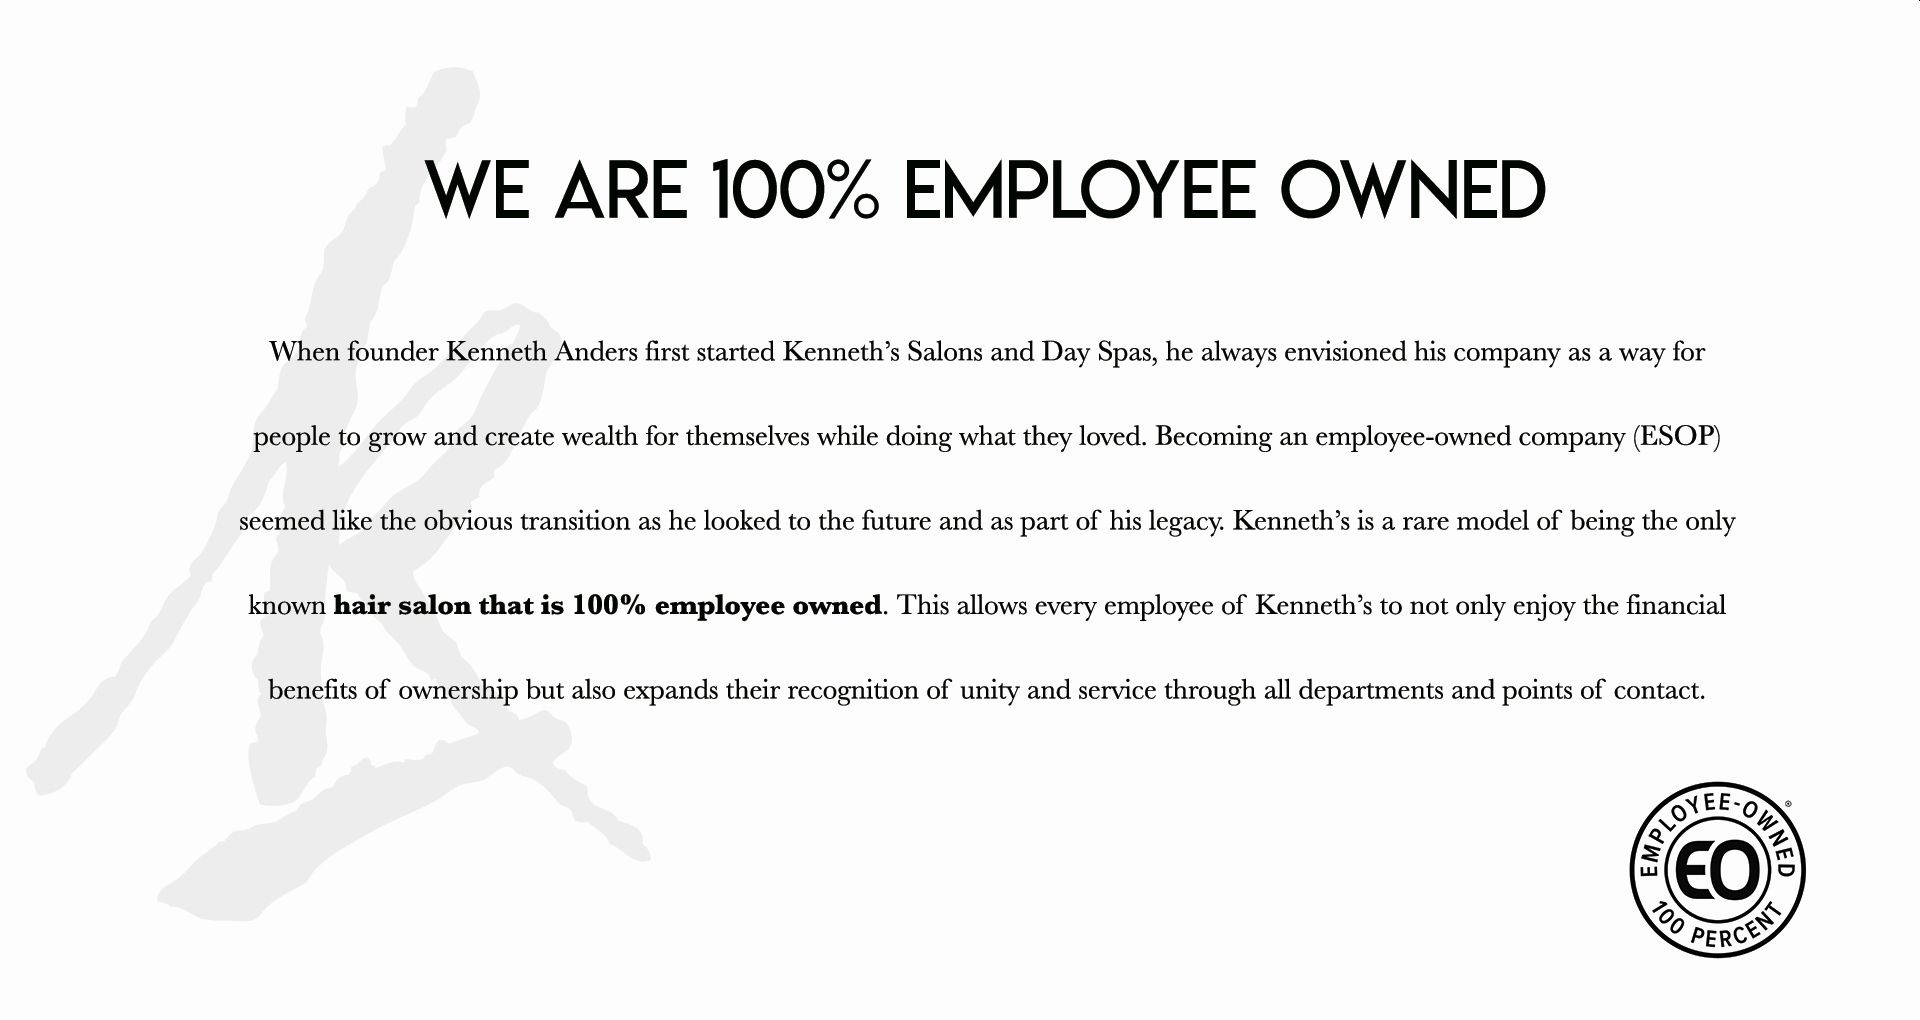 We Are 100% Employee Owned